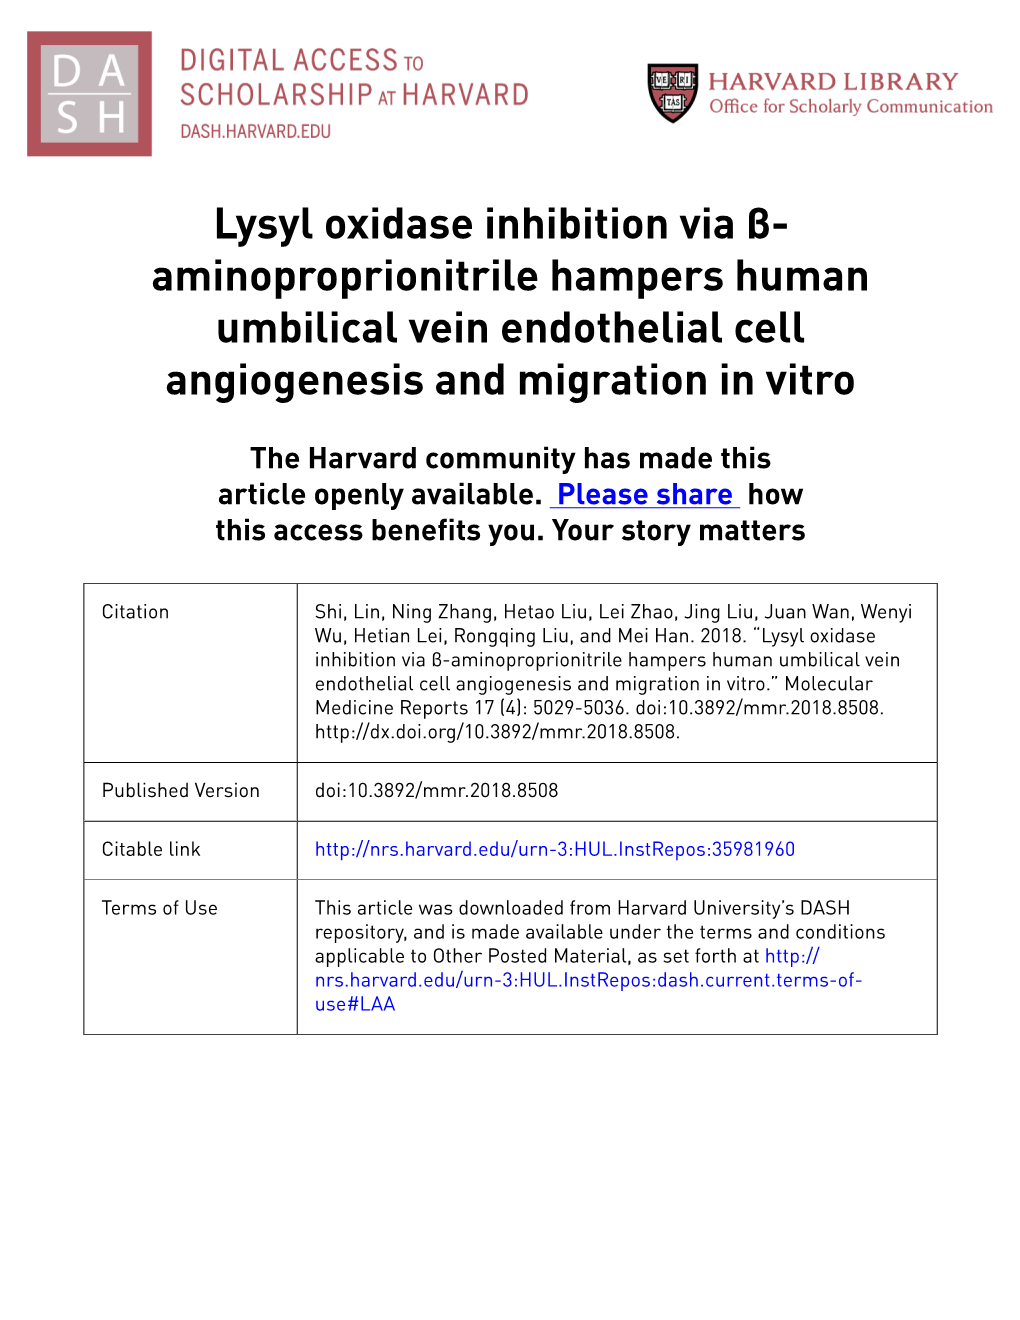 Lysyl Oxidase Inhibition Via Β- Aminoproprionitrile Hampers Human Umbilical Vein Endothelial Cell Angiogenesis and Migration in Vitro